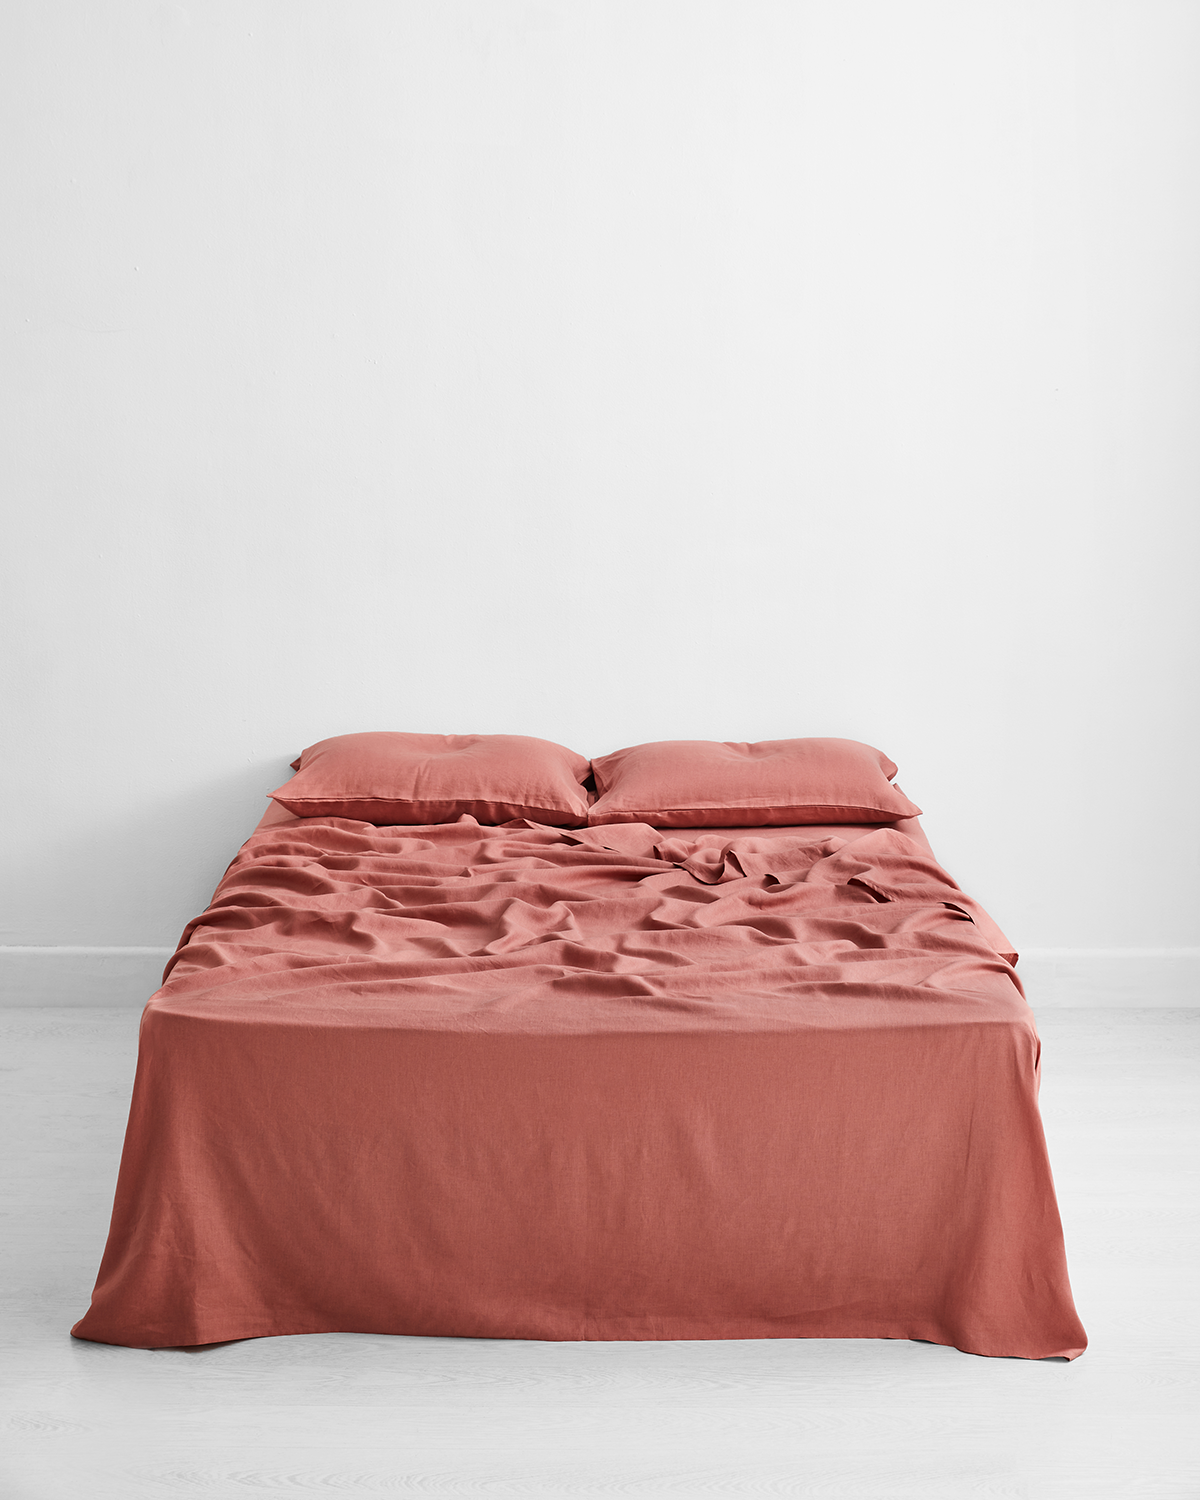 https://pyxis.nymag.com/v1/imgs/a3d/fb6/53c7232f3a7d608c549ae32d1a4306282b-PINK-CLAY-Bedthreadssheets.png